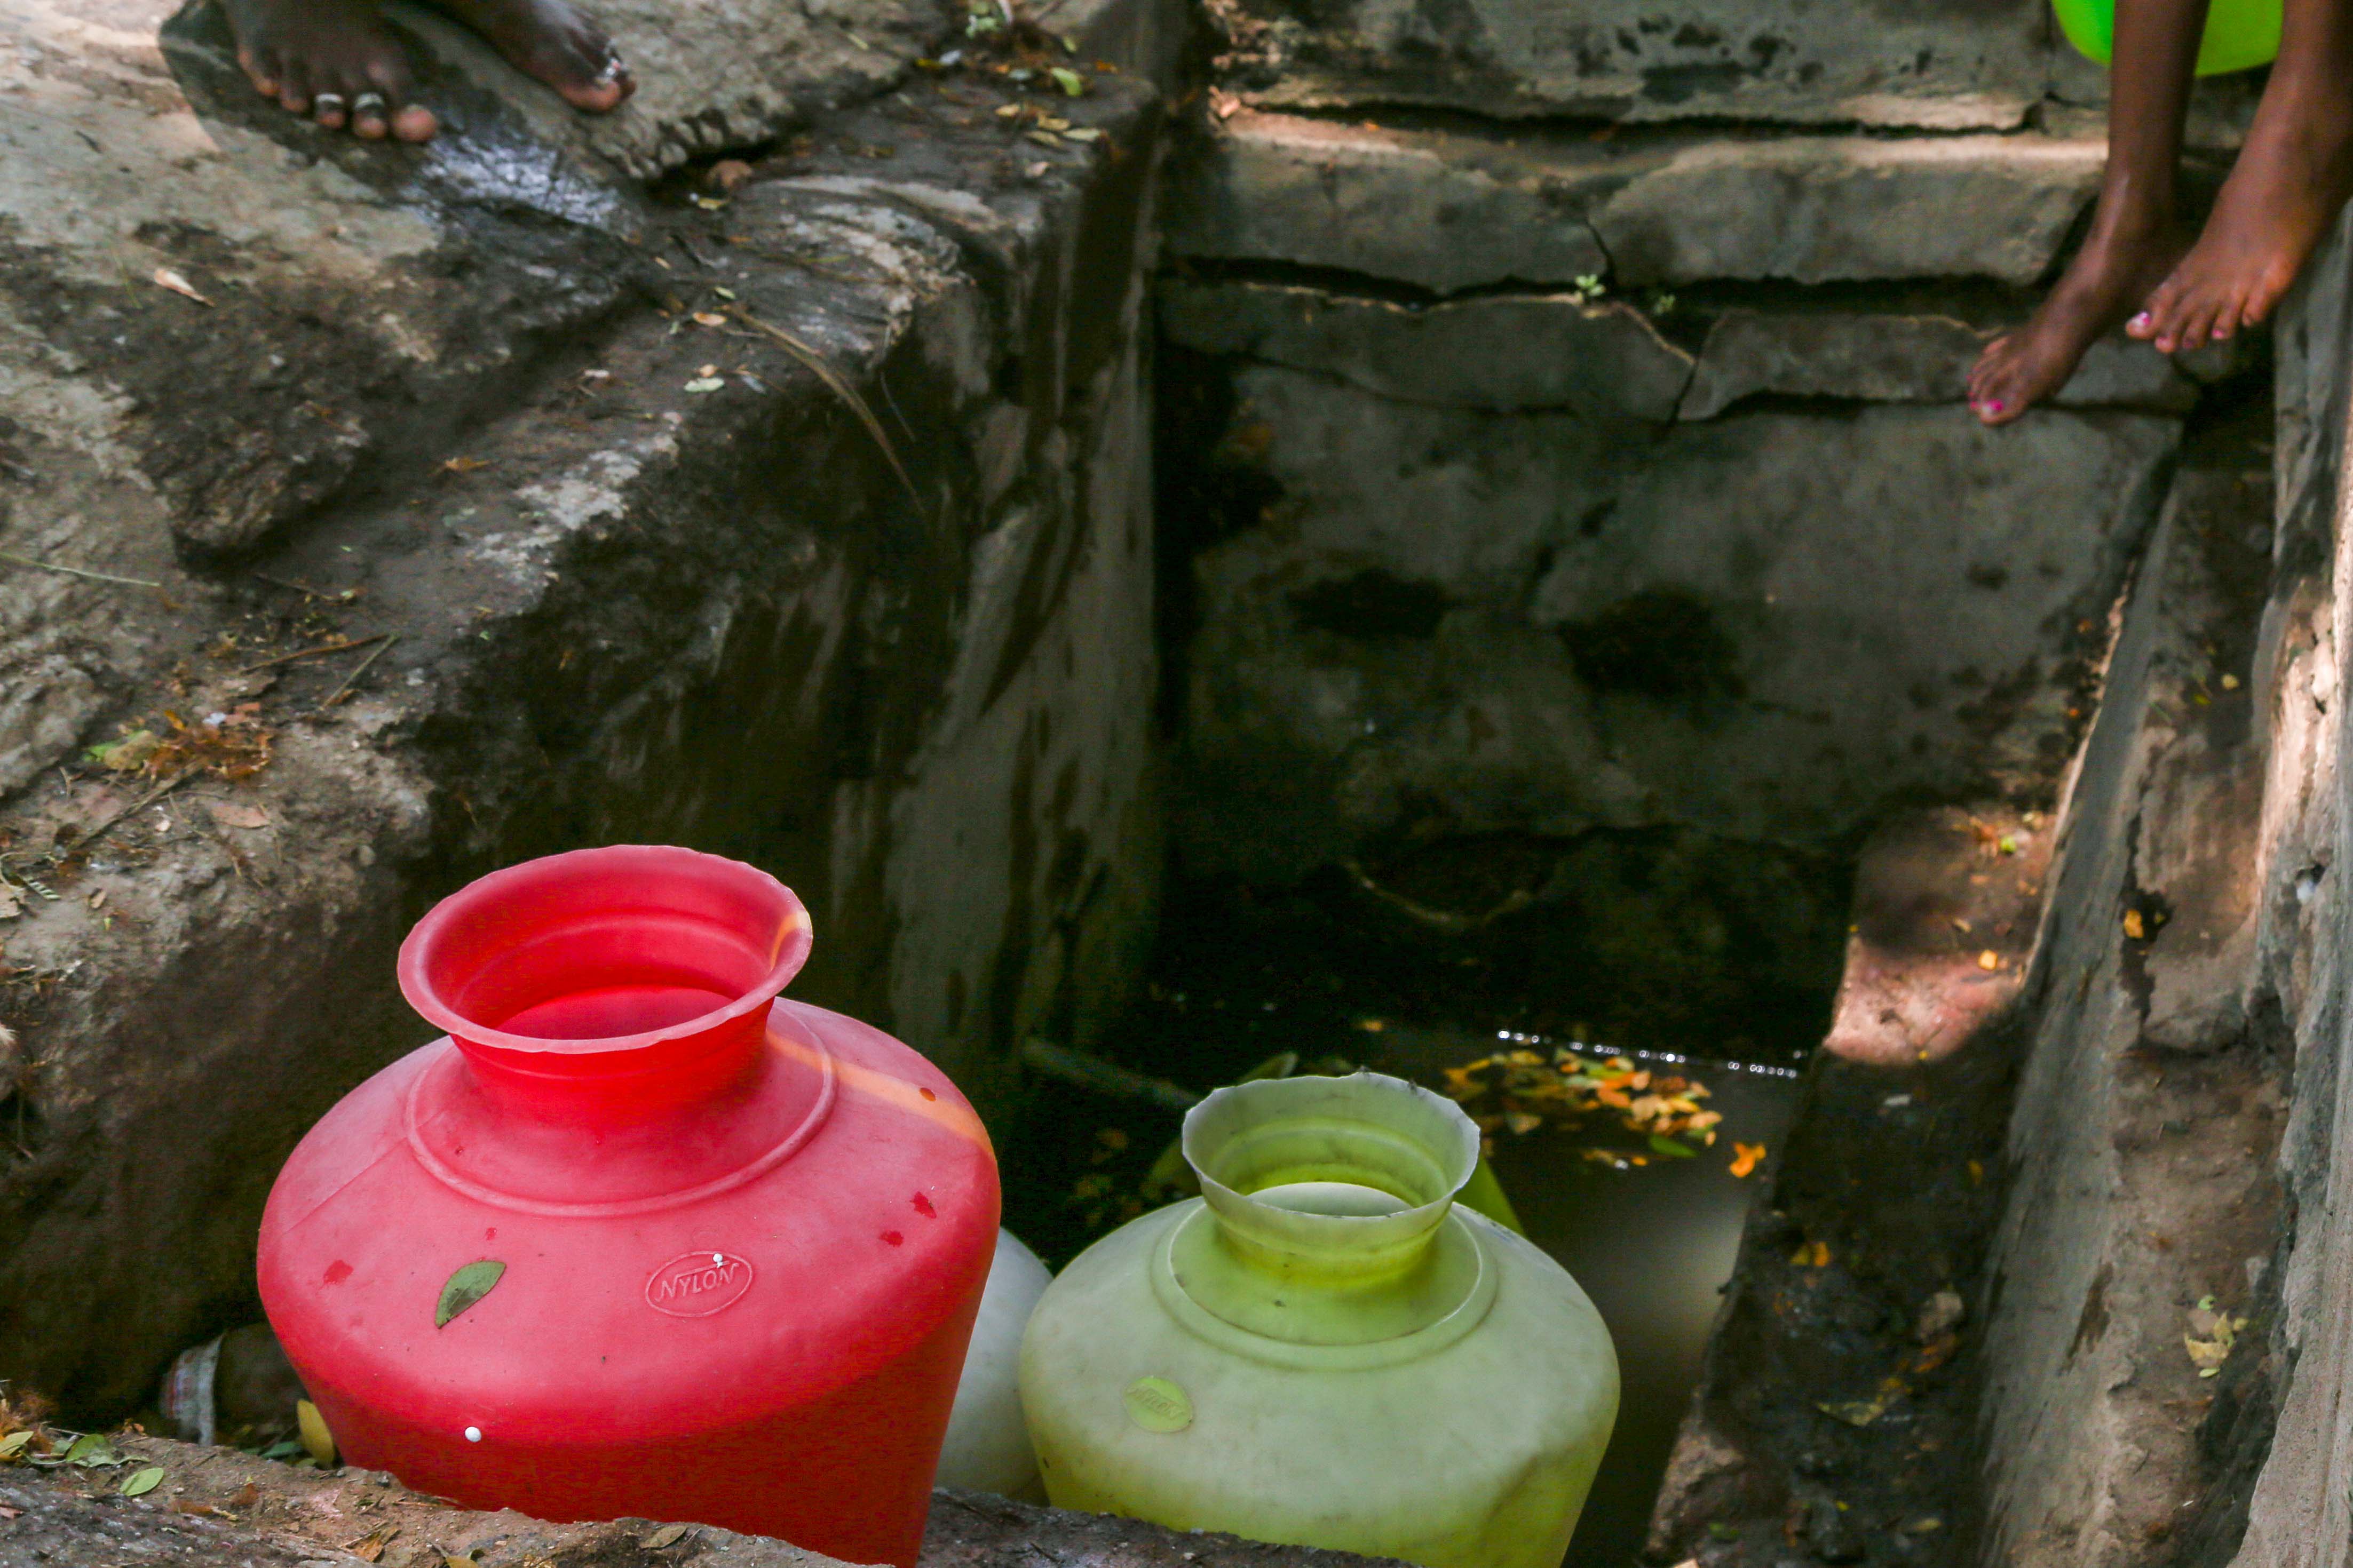 This dirty pit provides drinking water for Shanthinagar residents